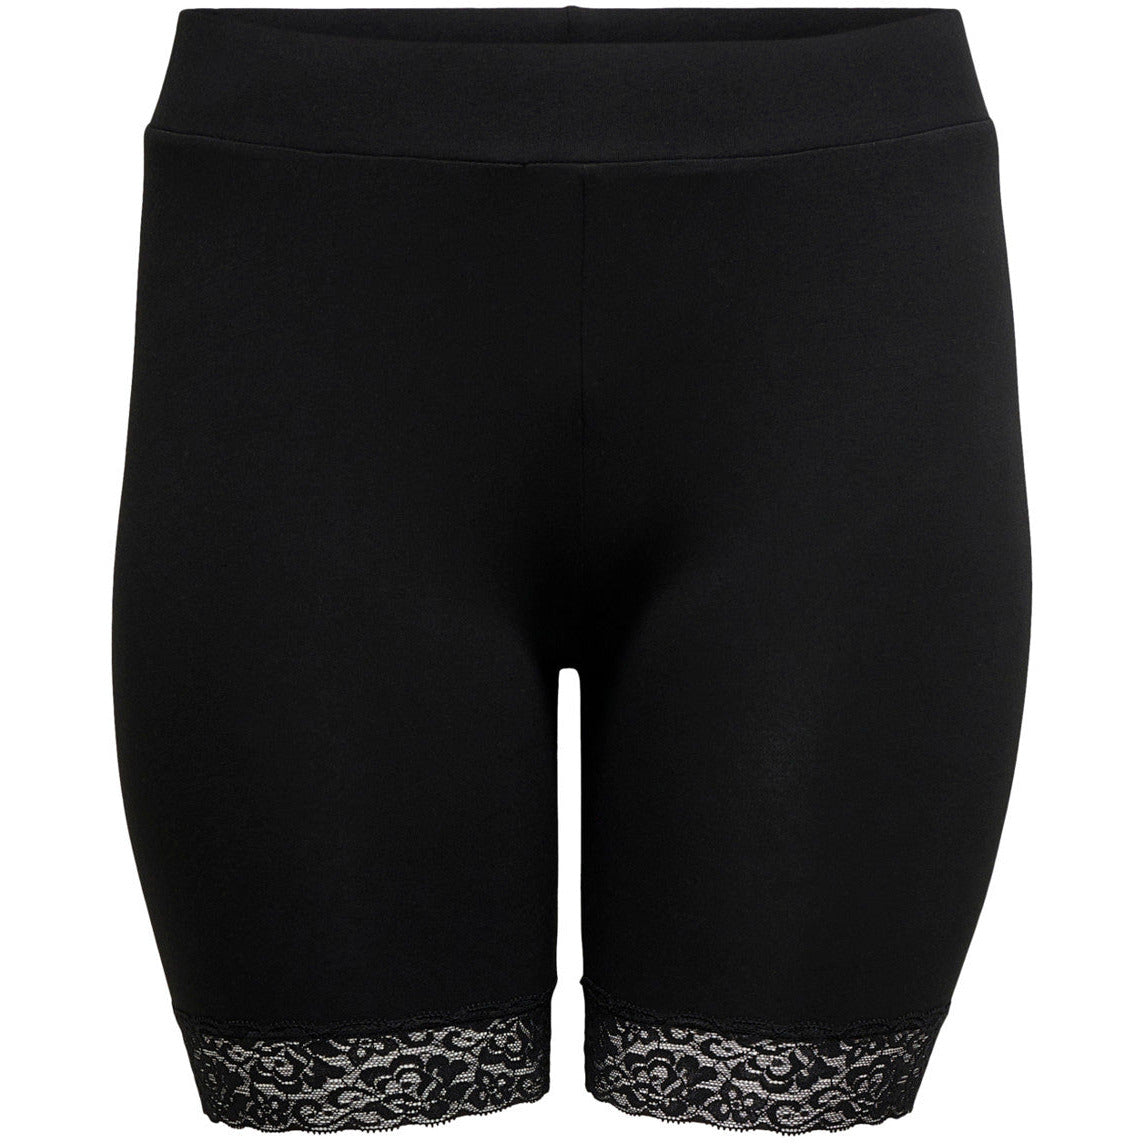 Only Lace Trim Shorts in Black - Wardrobe Plus